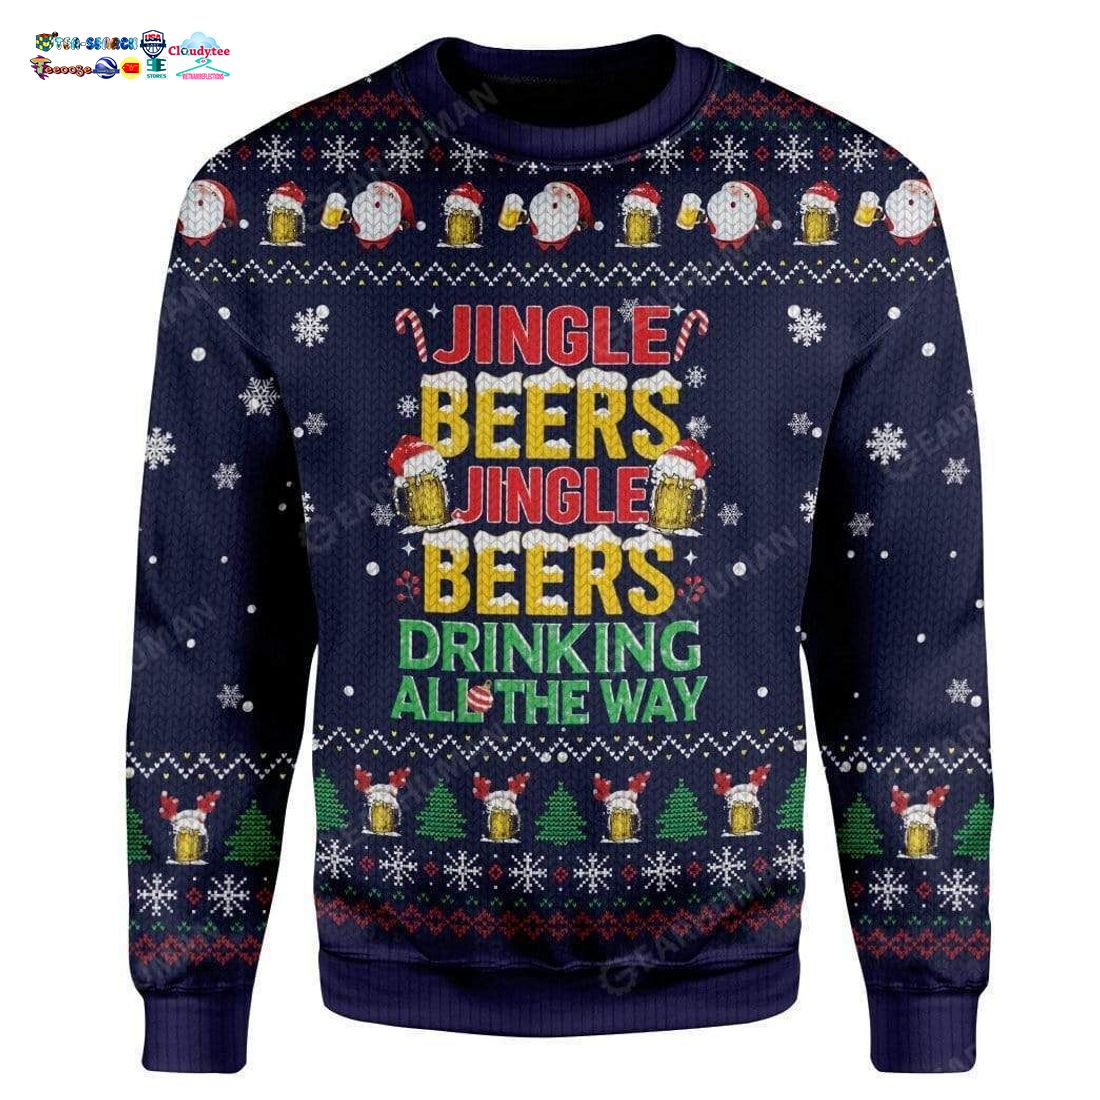 Jingle Beers Jingle Beers Drinking All The Way Ver 1 Ugly Christmas Sweater